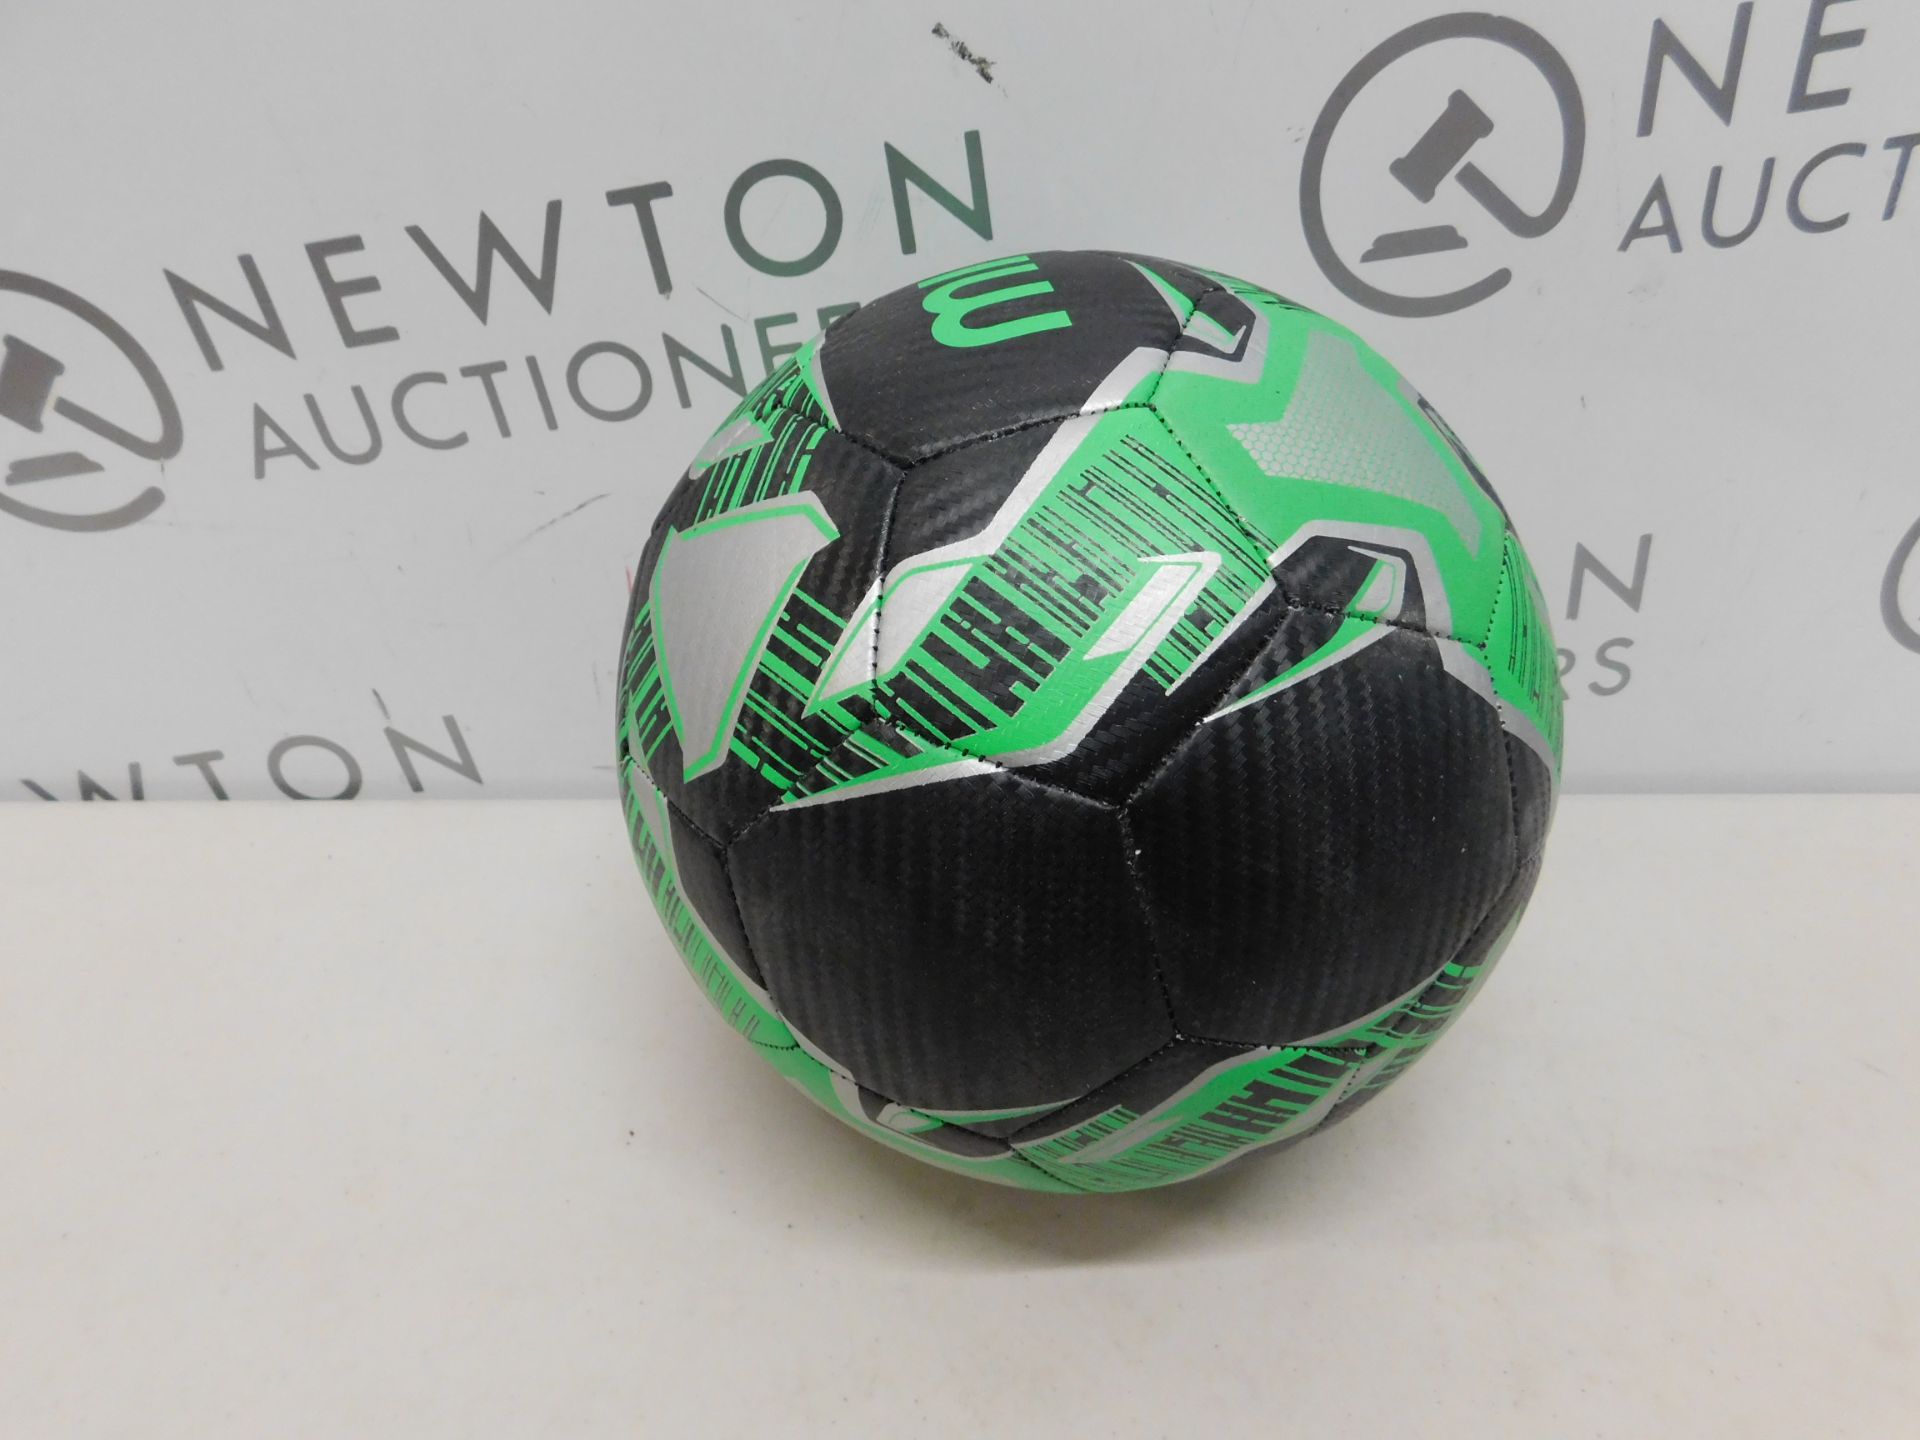 1 MITRE SIZE 5 FOOTBALL RRP £19.99